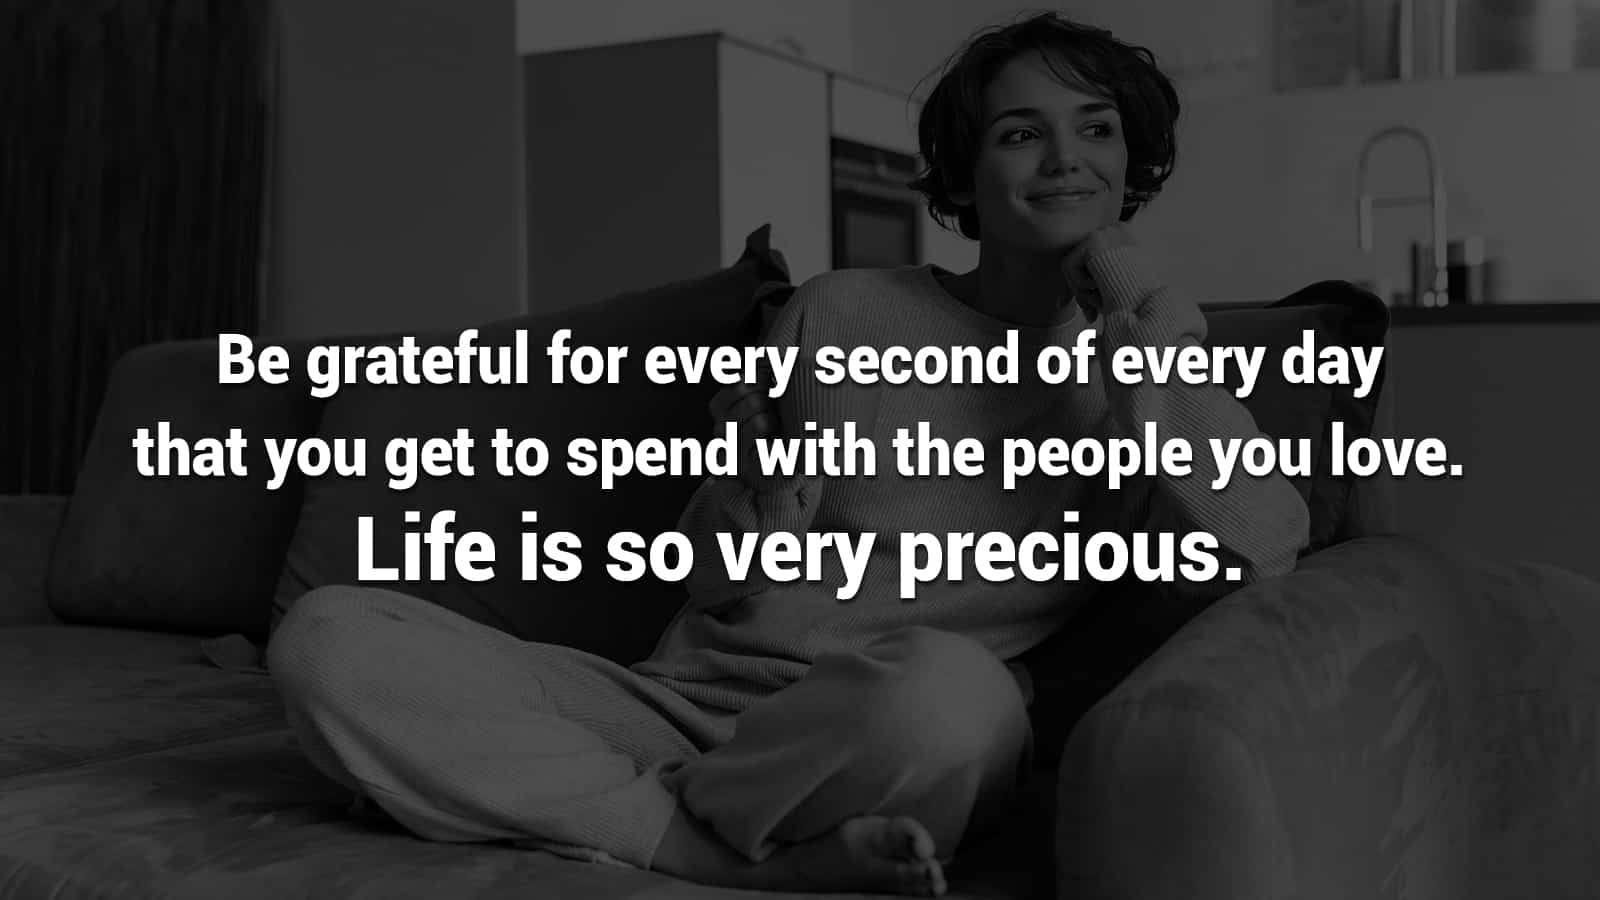 be grateful for every second of every day that you get to spend with the  people you love. life is so very precious: Life is precious